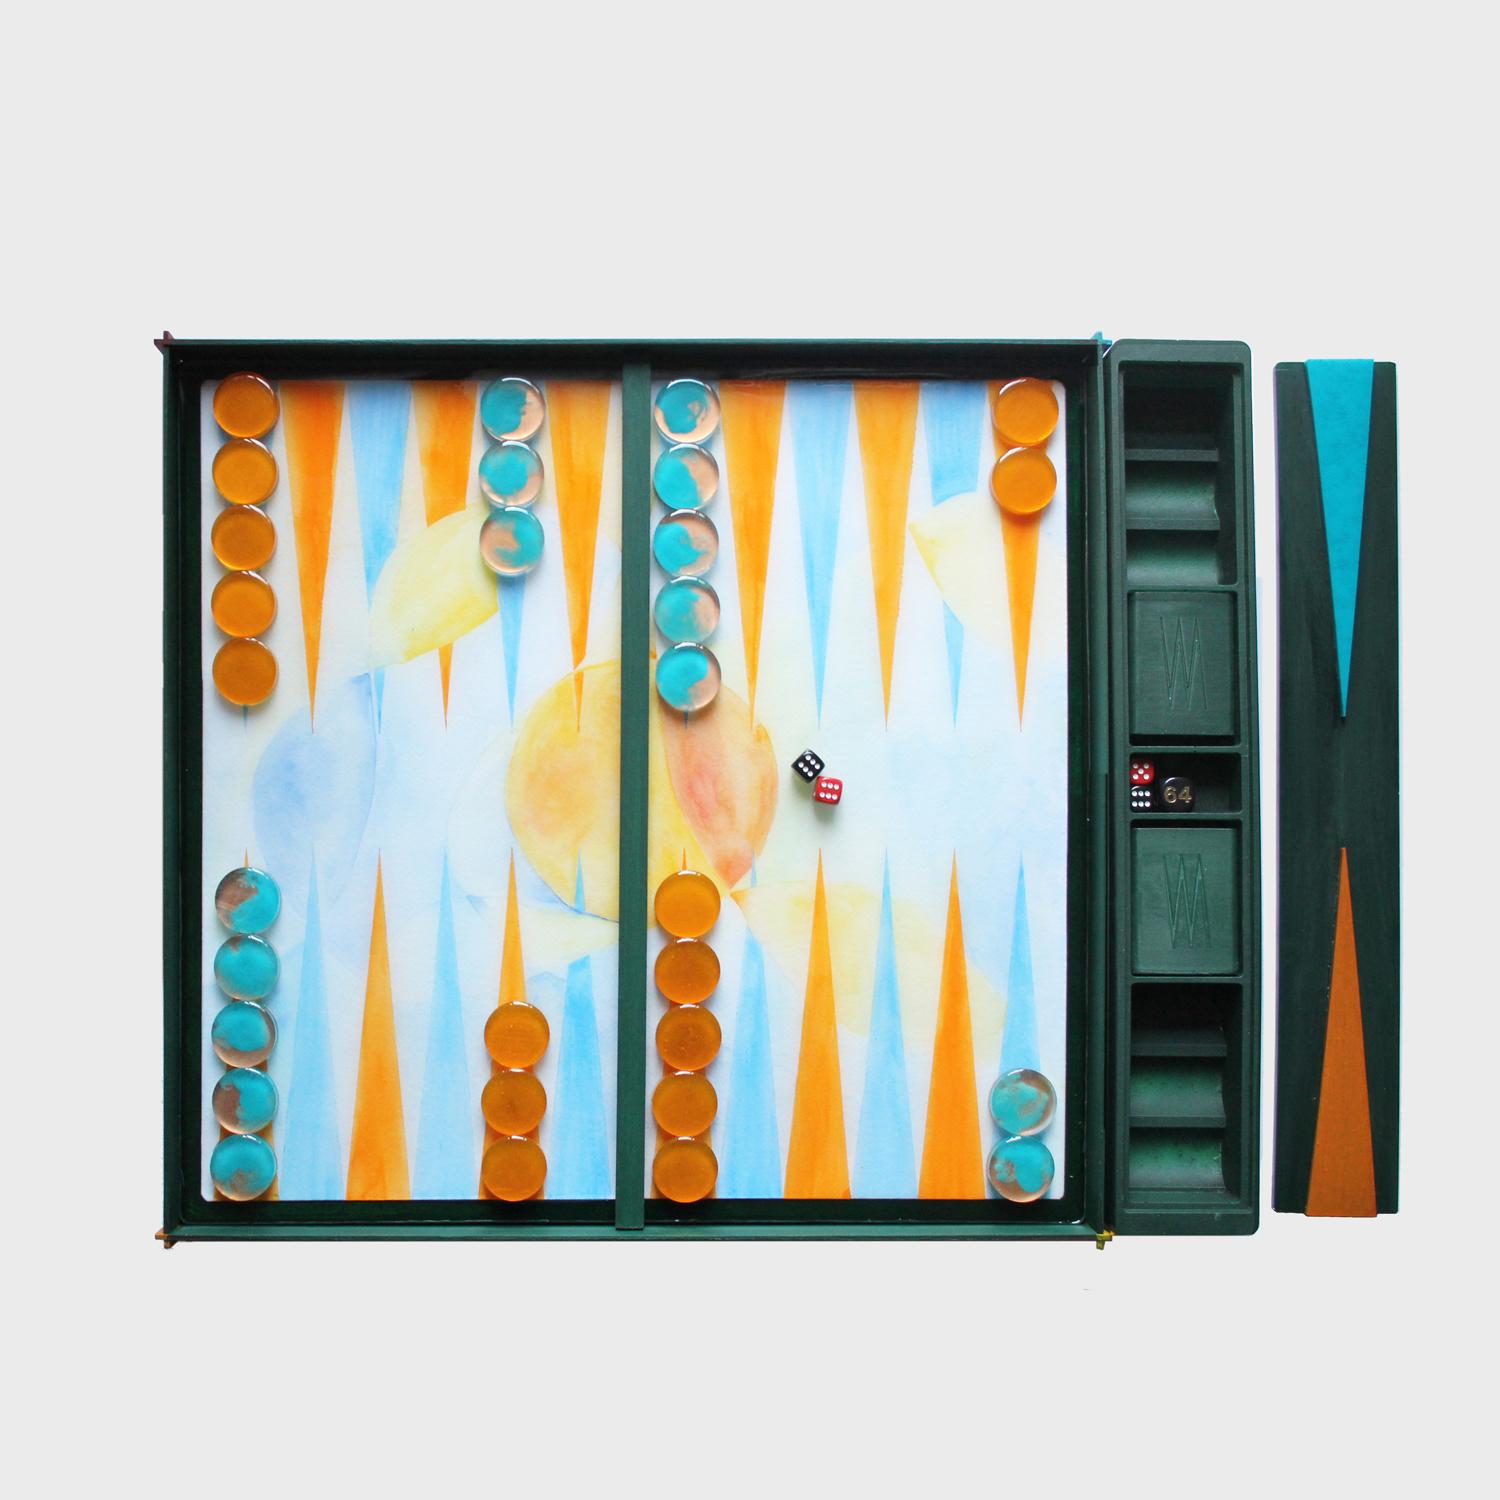 The Backgammon Board is a handmade limited collection (100 pieces) designed by the young Milan based Valeria Molinari for Dilmos Edizioni. The project, composed of four boards inspired by the elements of water, air, fire and earth, is
born from the